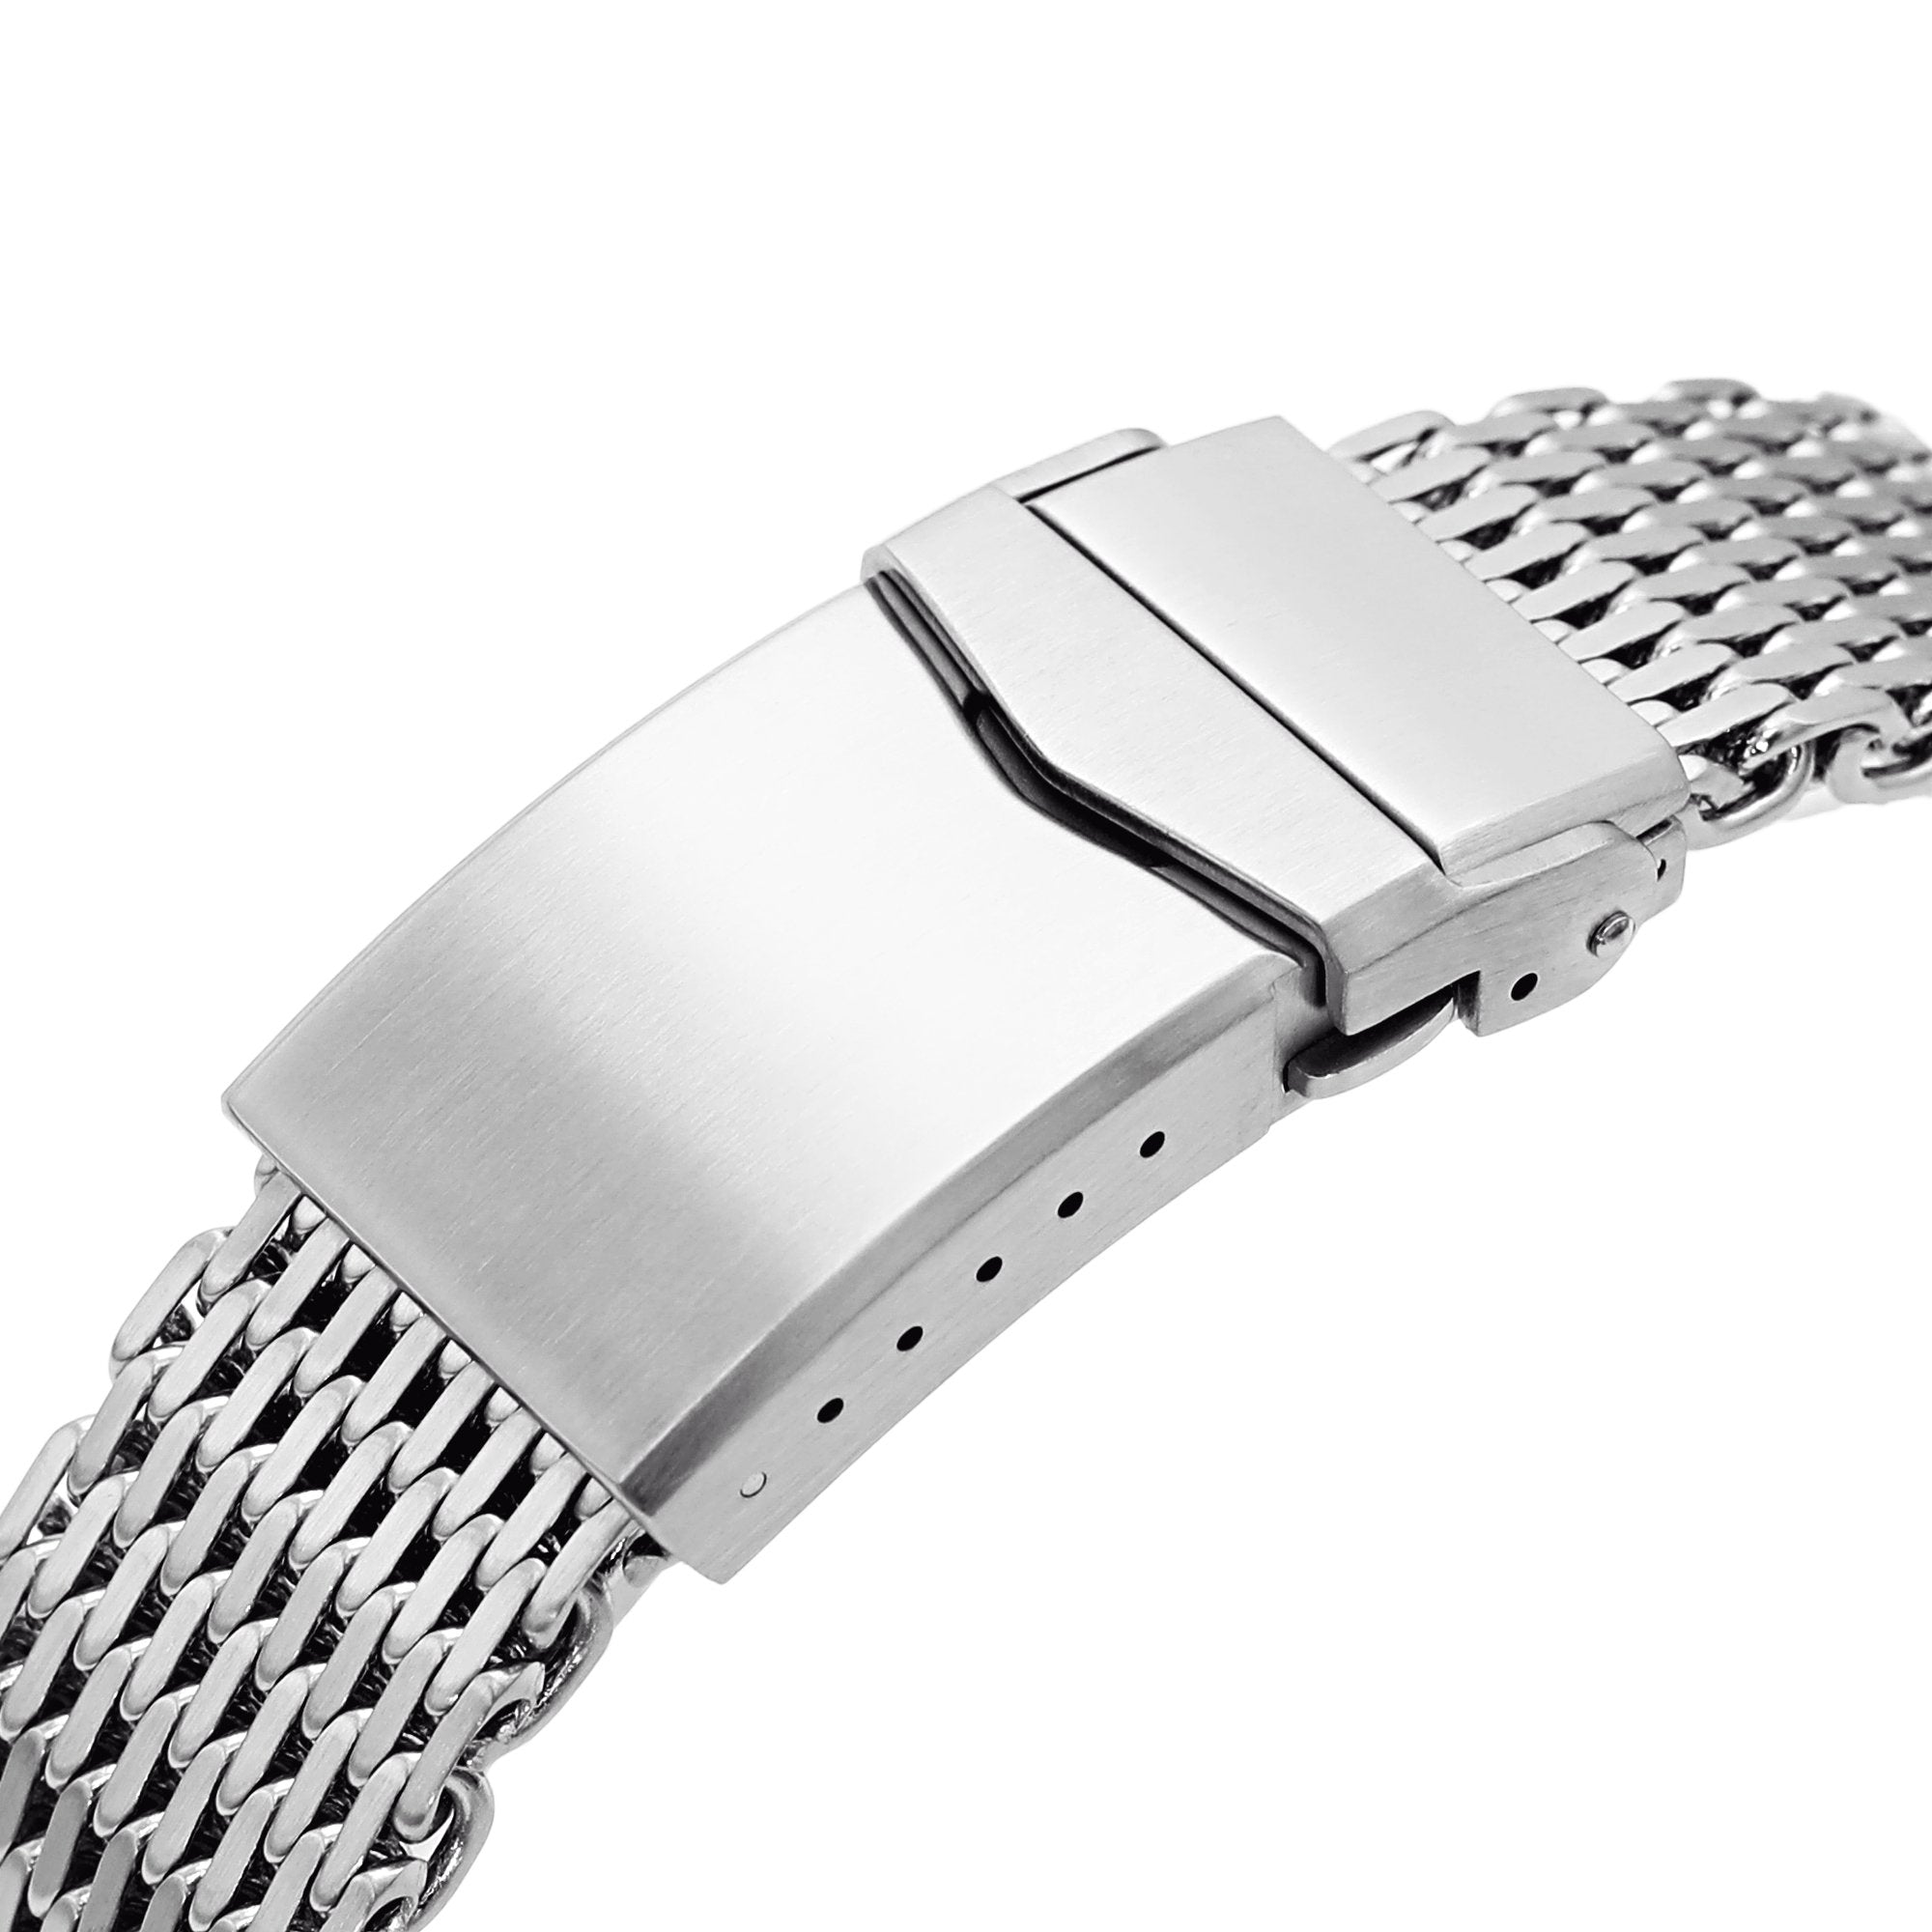 20mm Brushed Tapered Winghead "SHARK" Mesh watch band, V-Clasp Strapcode Watch Bands